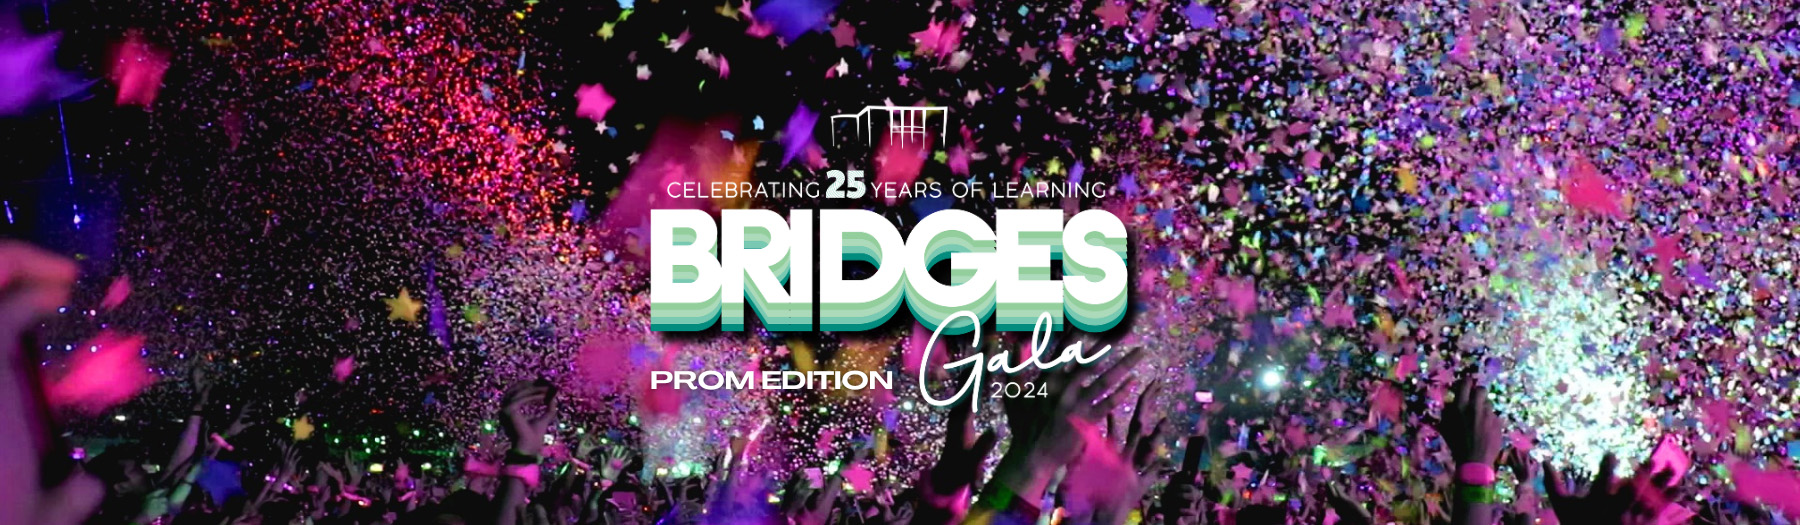 It’s Official—Bridges Gala is April 13 and You’re Invited!